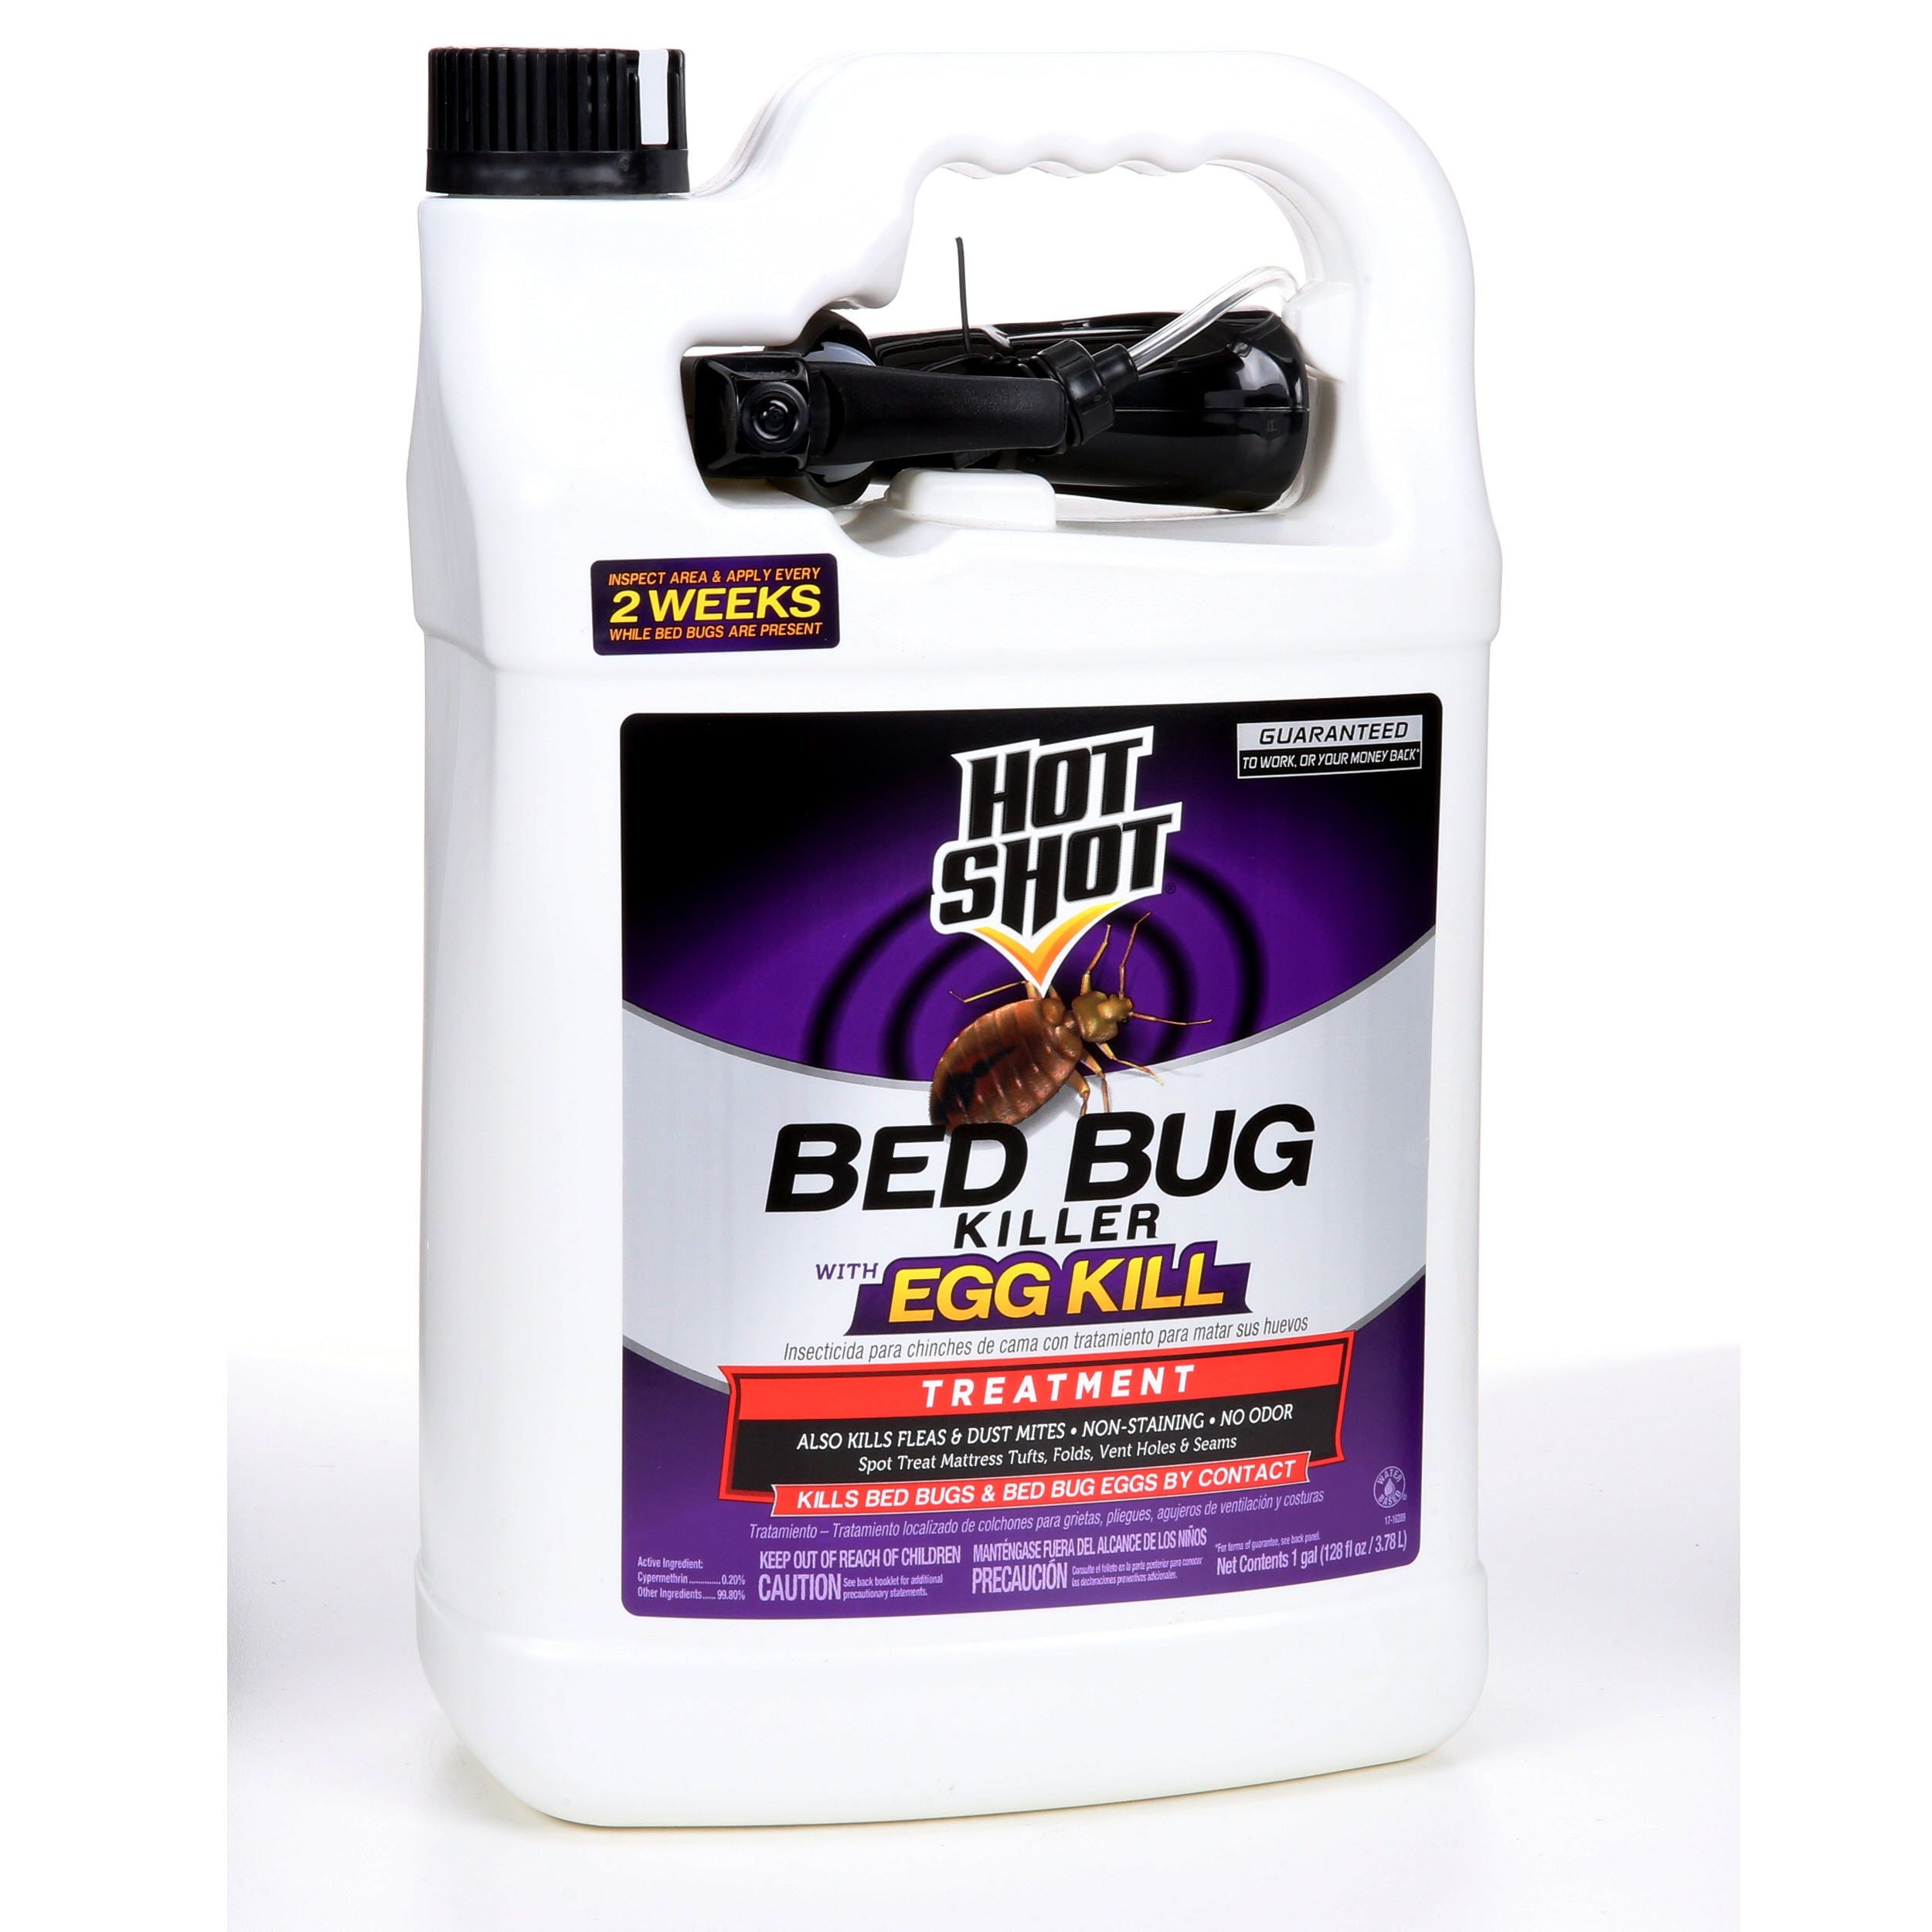 Dust for Bed Bugs: Exterminate and Eliminate with Power!